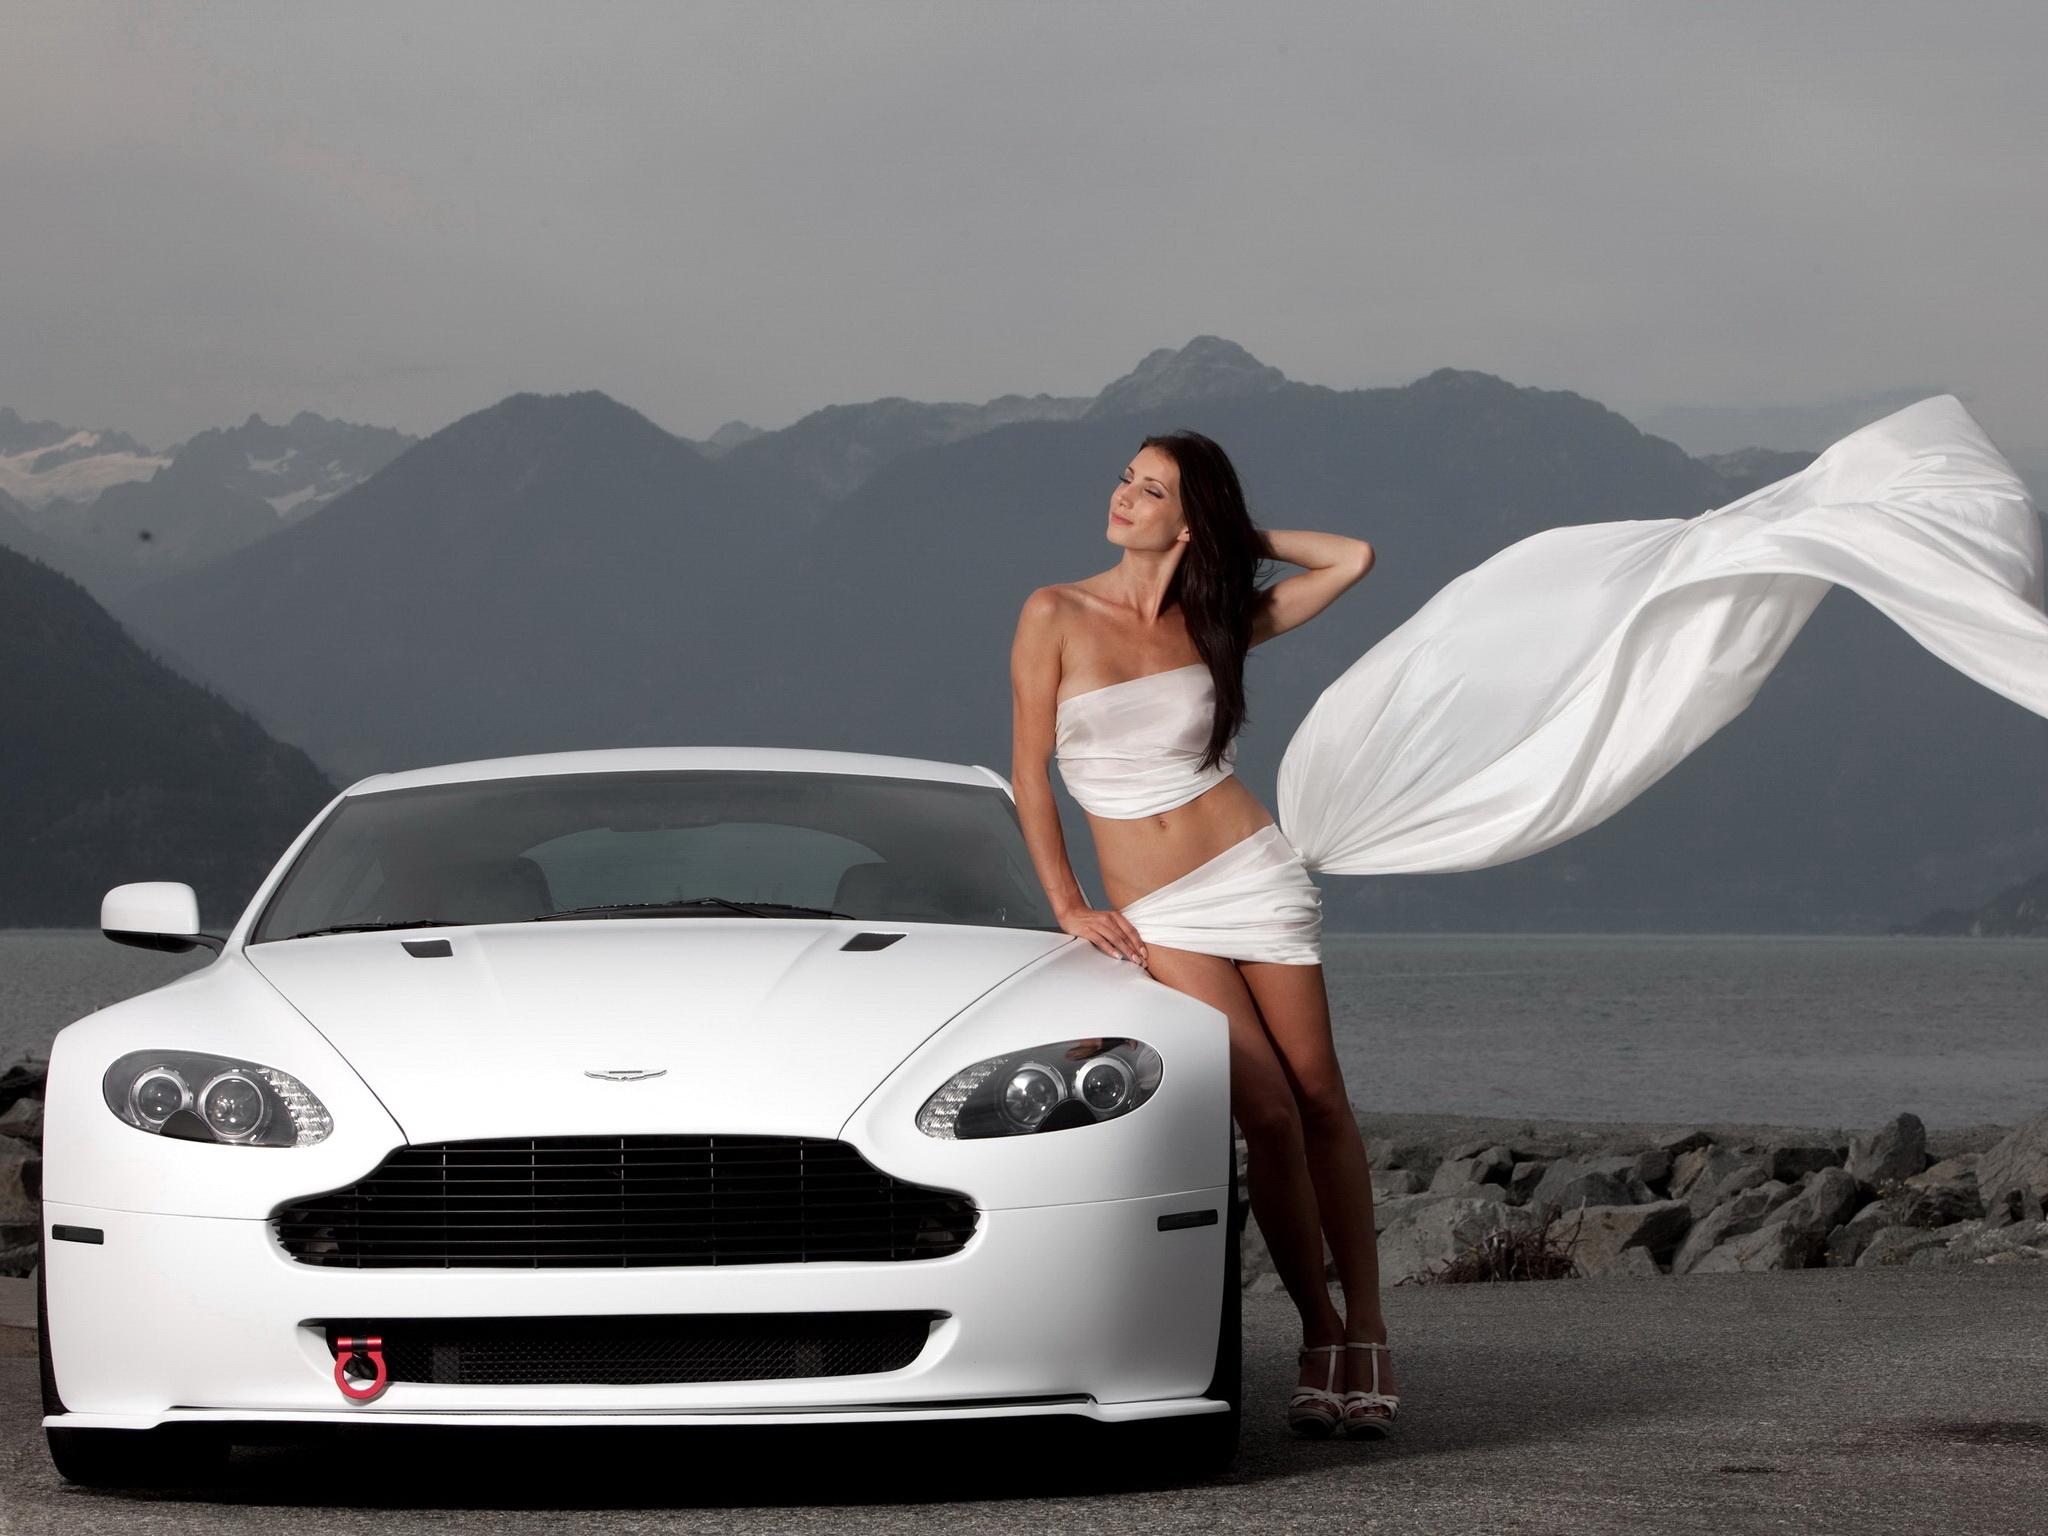 Amazing Girls & Cars Pictures & Backgrounds